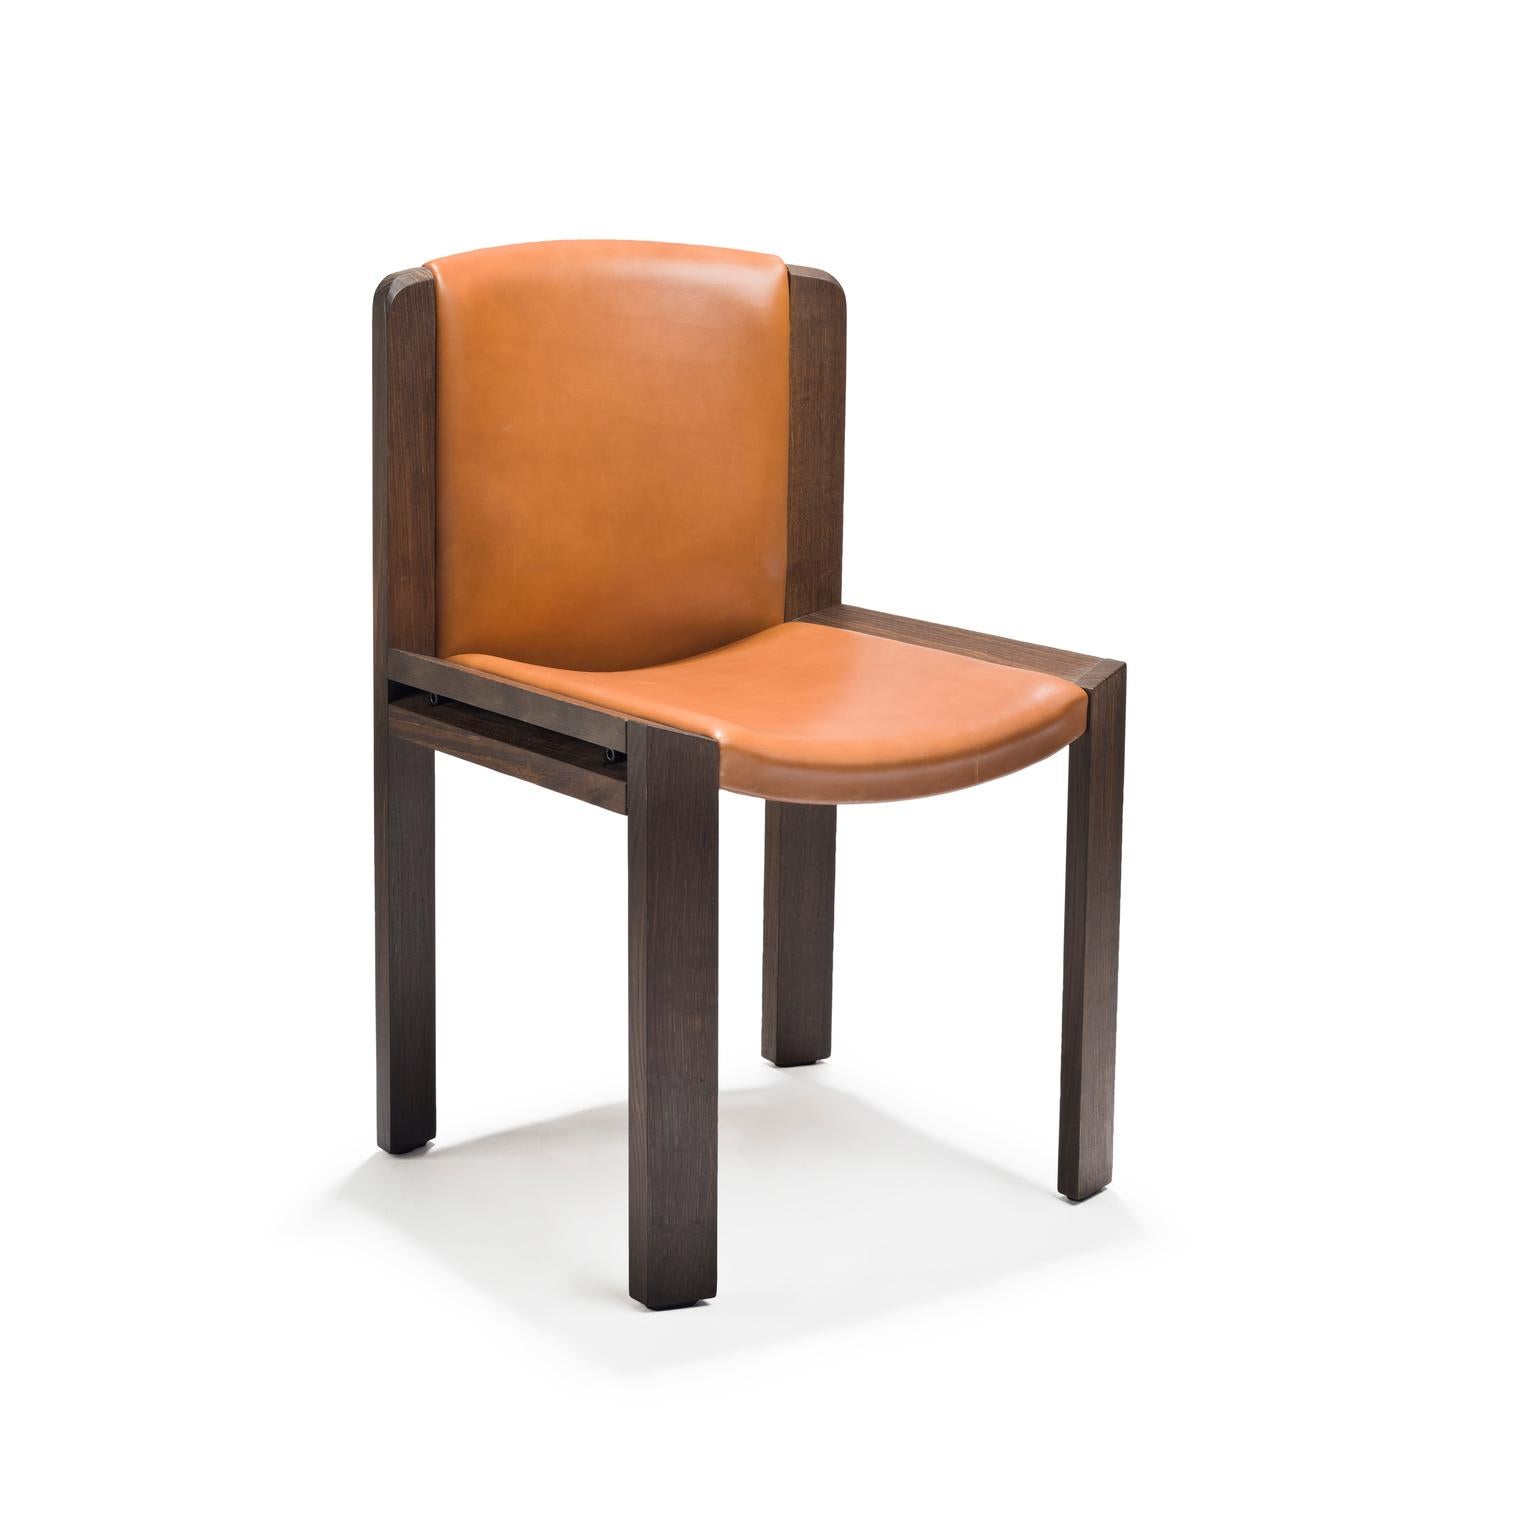 Mid-Century Modern Joe Colombo 'Chair 300' Wood and Sørensen Leather Chair by Karakter For Sale